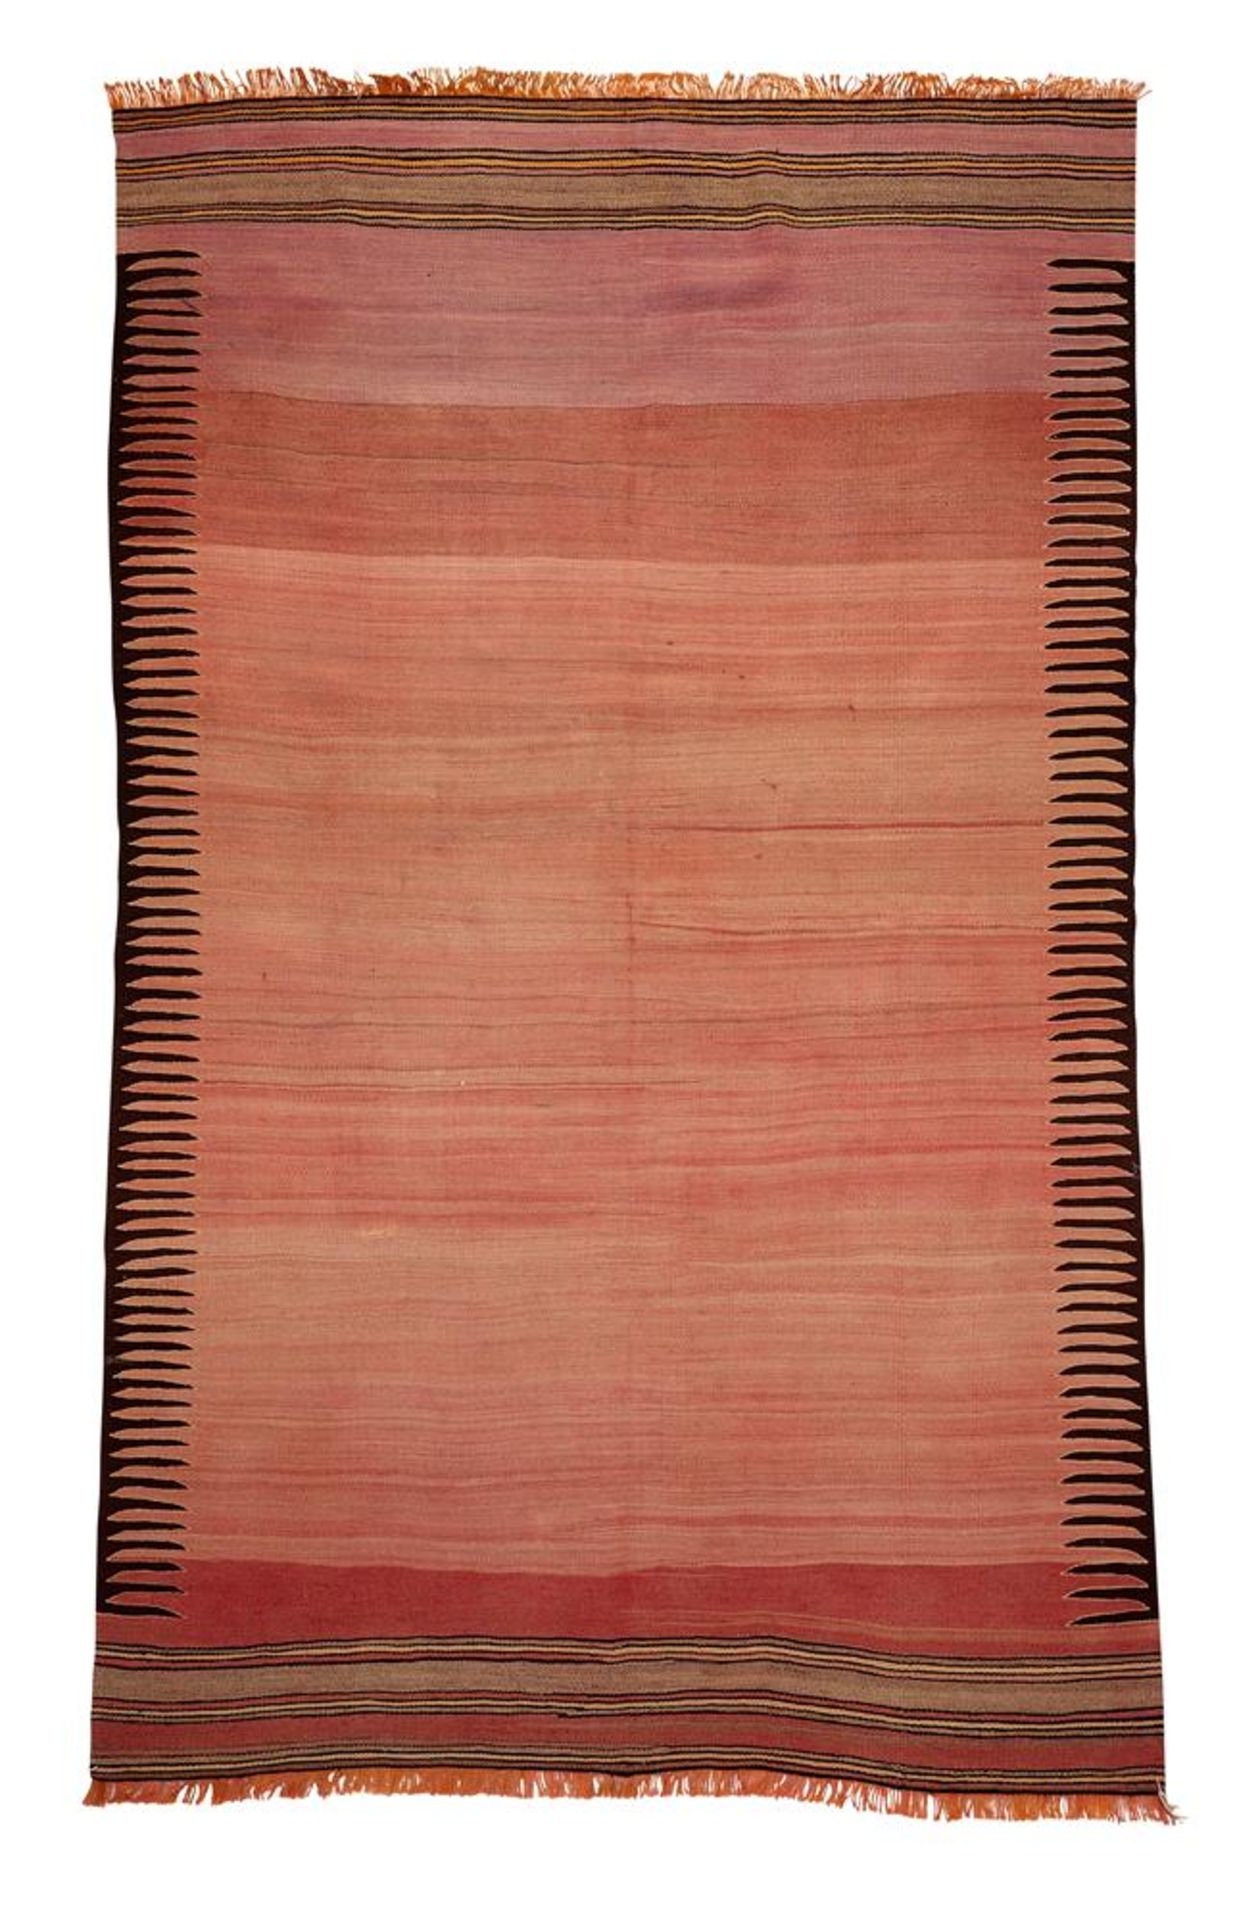 A KILIM RUG WITH PINK GROUND